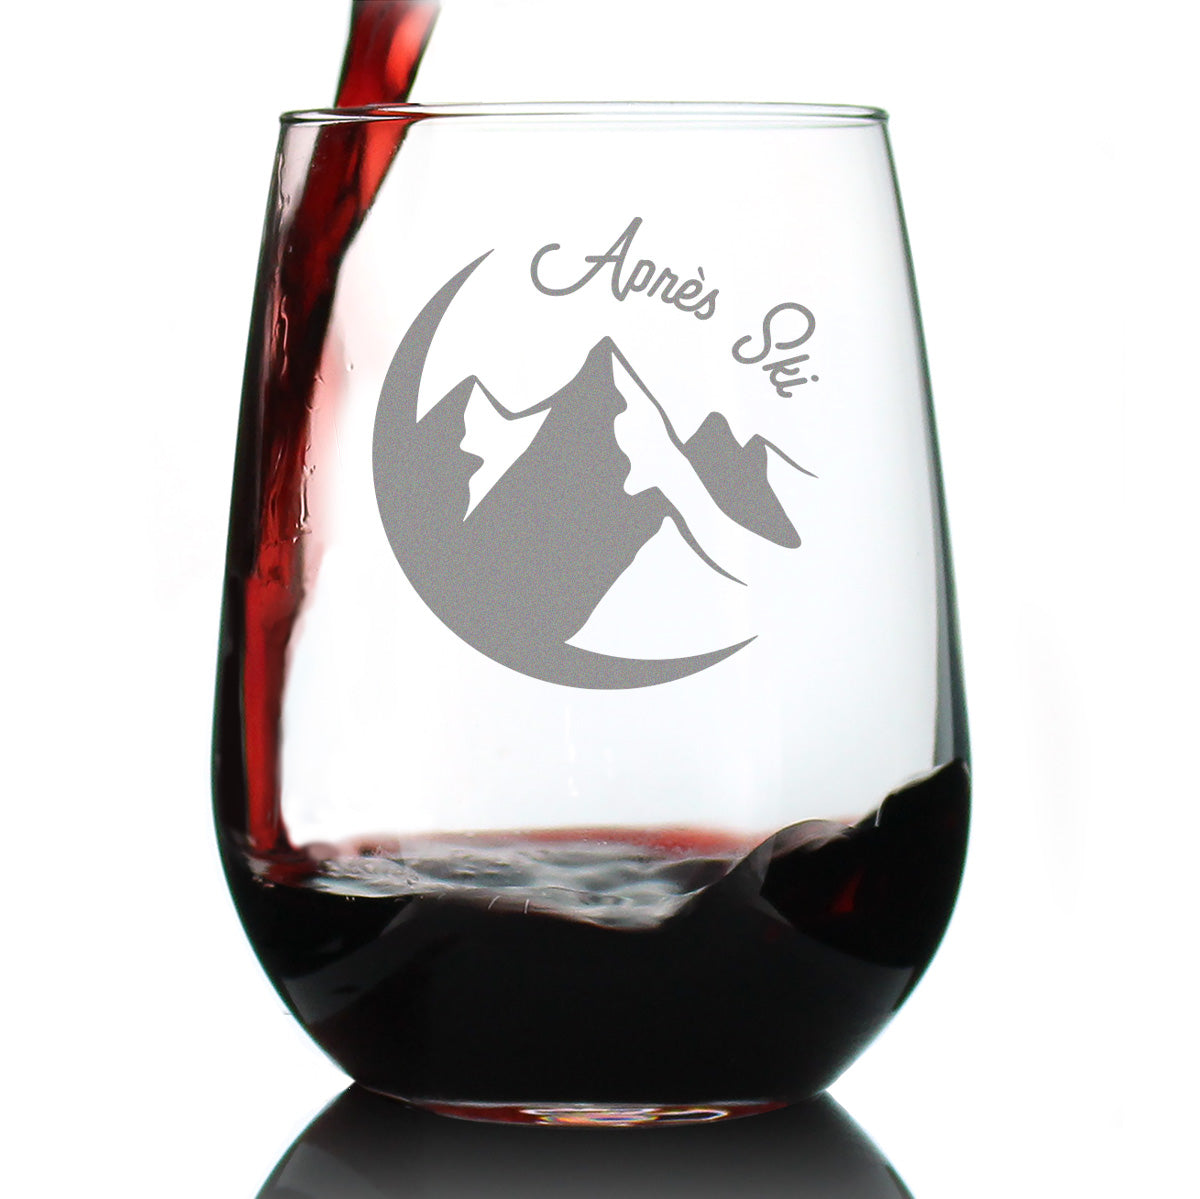 Apres Ski - Stemless Wine Glass - Unique Skiing Themed Decor and Gifts for Mountain Lovers - Large 17 Oz Glasses